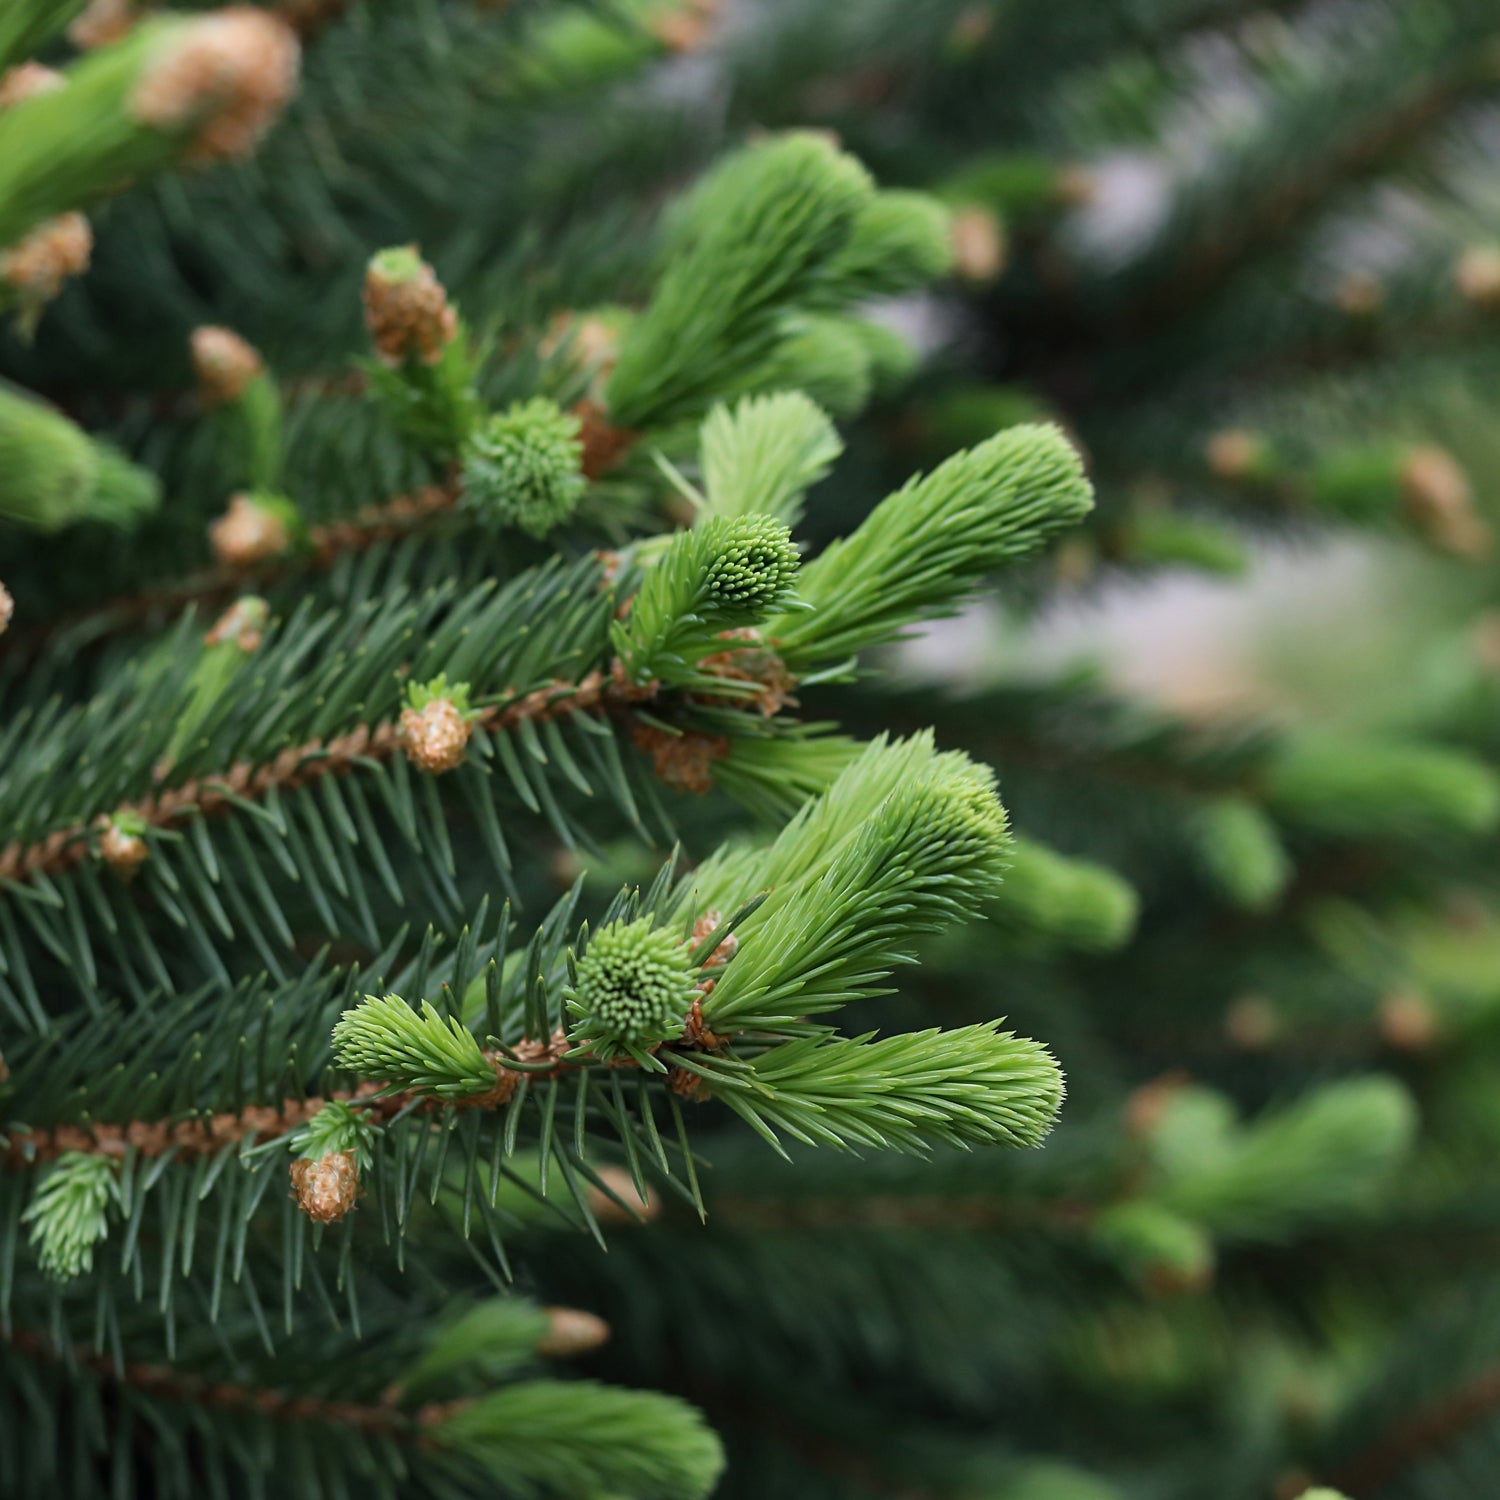 A fir tree close up - an inspiration for this scented candle